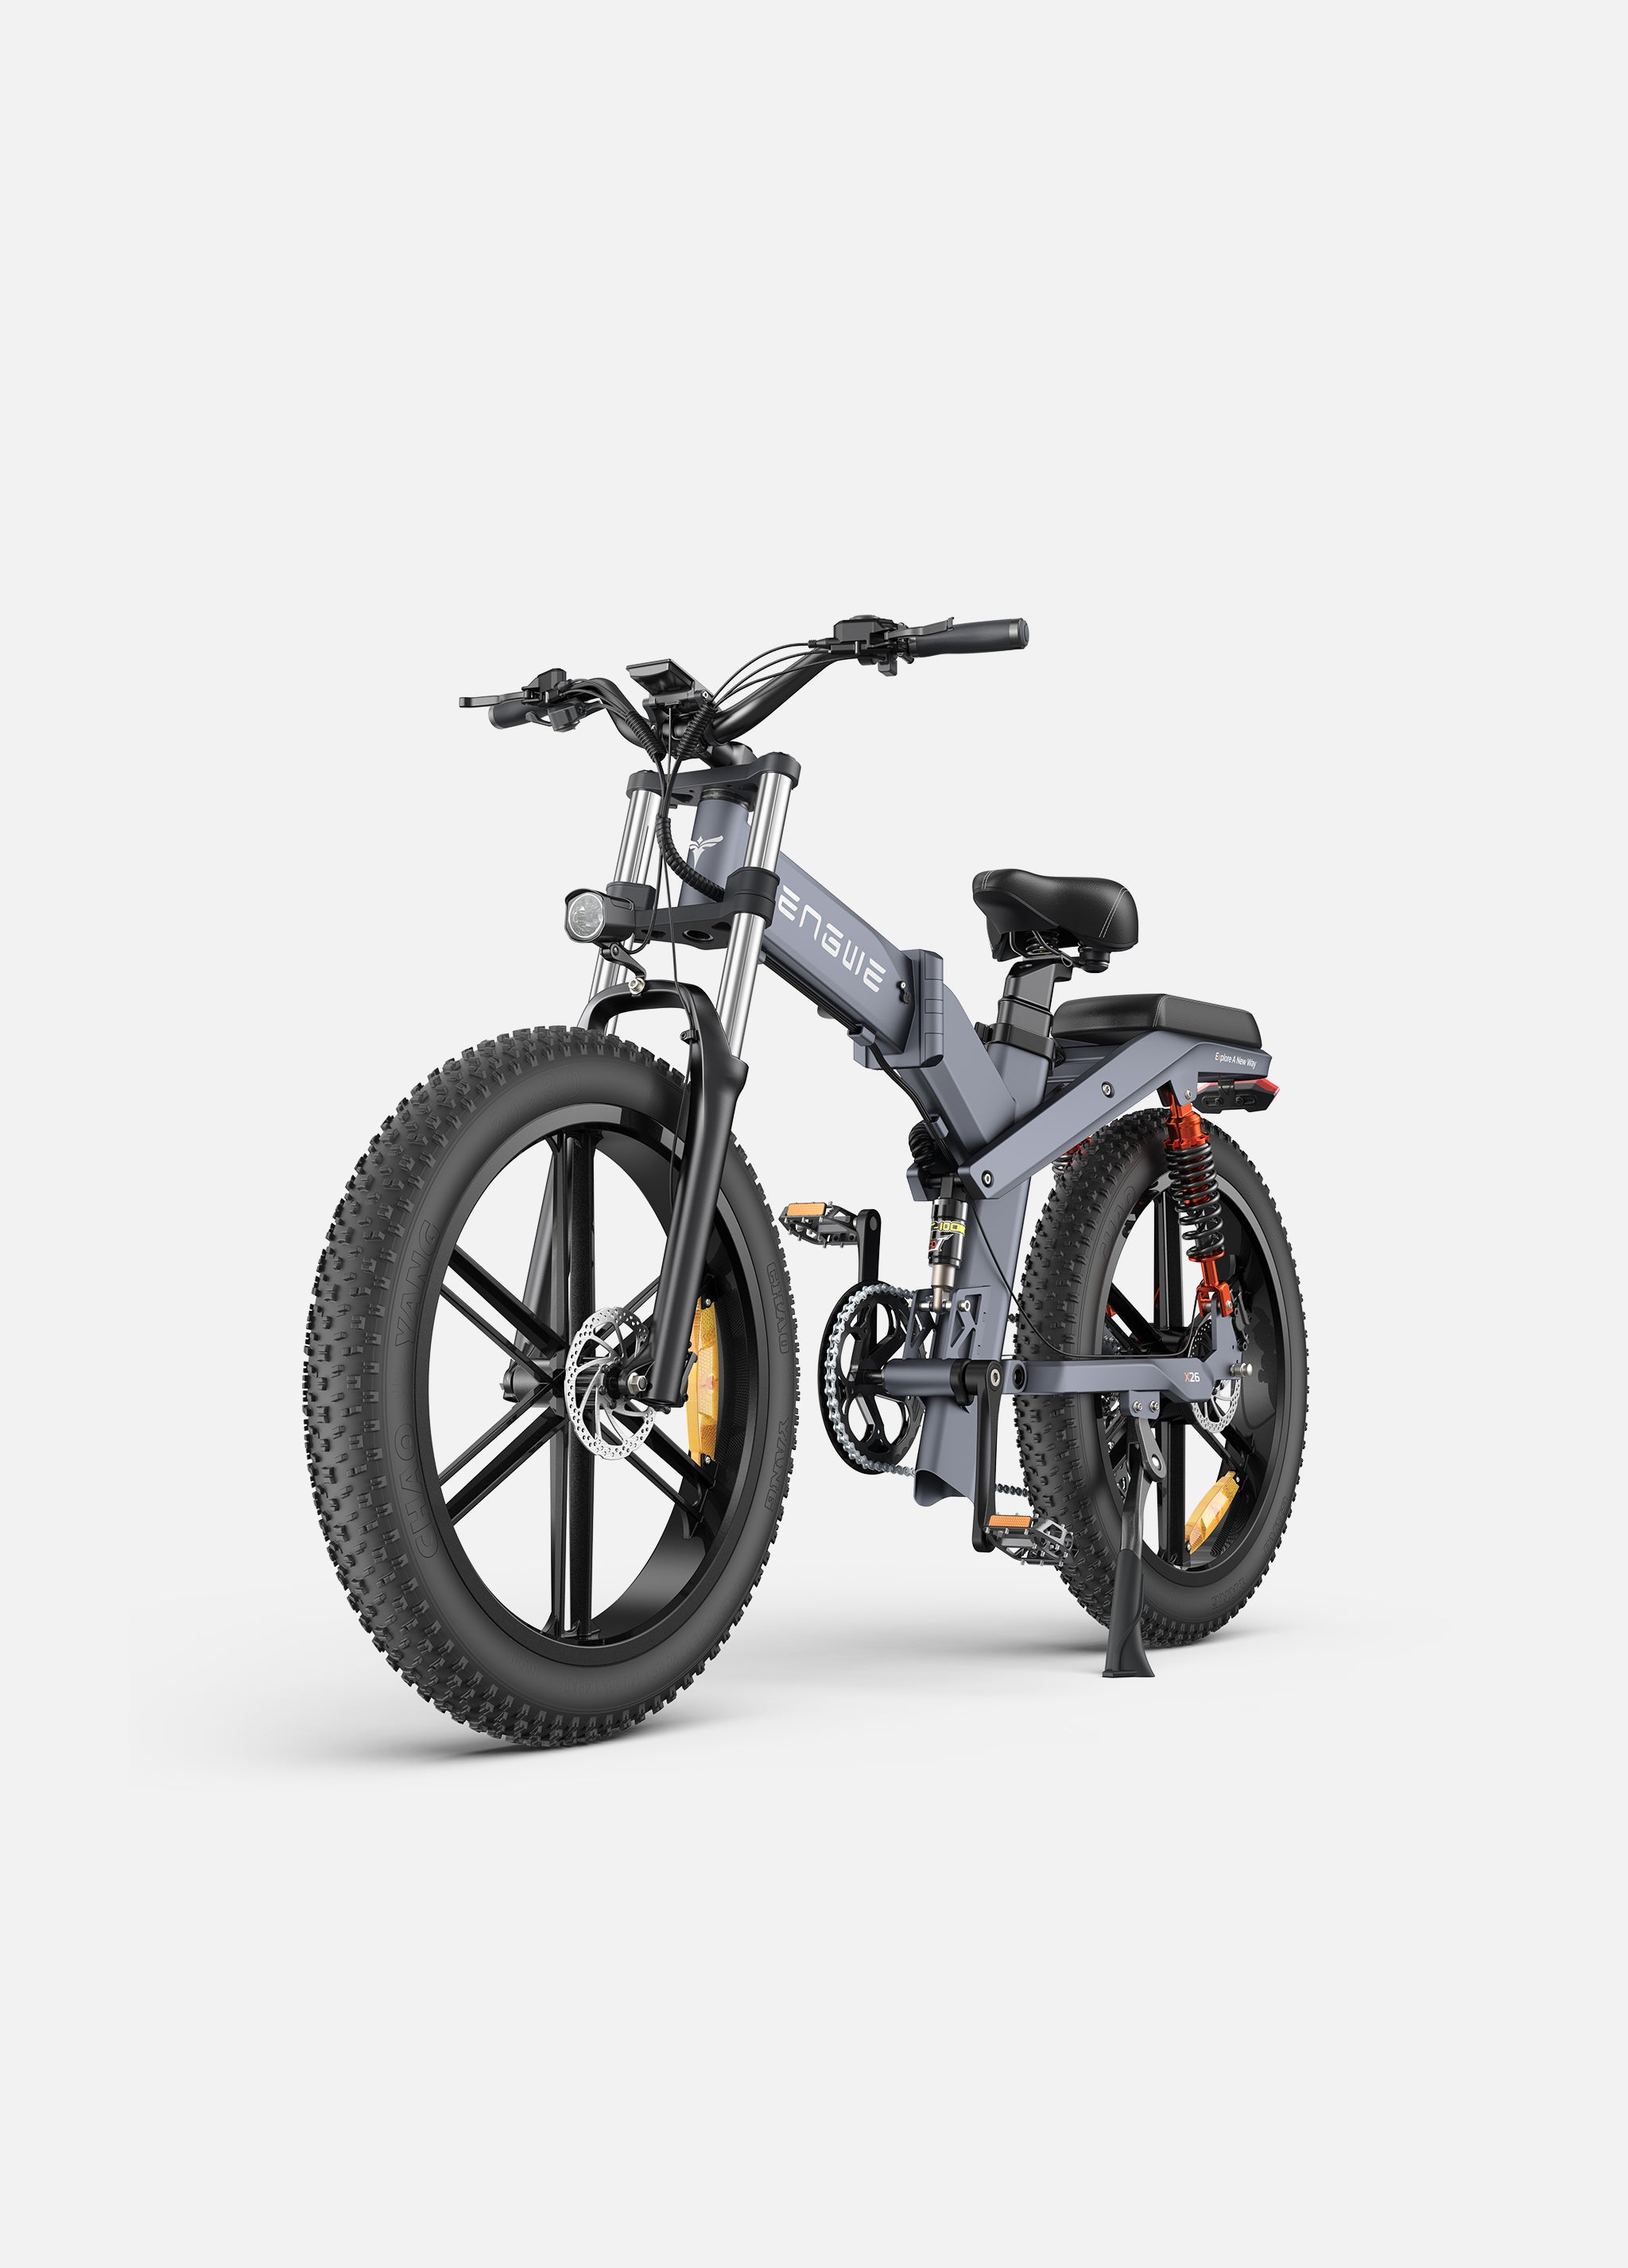 ENGWE M20 1000W Electric Bike, For the Passionate Explorer and Biker